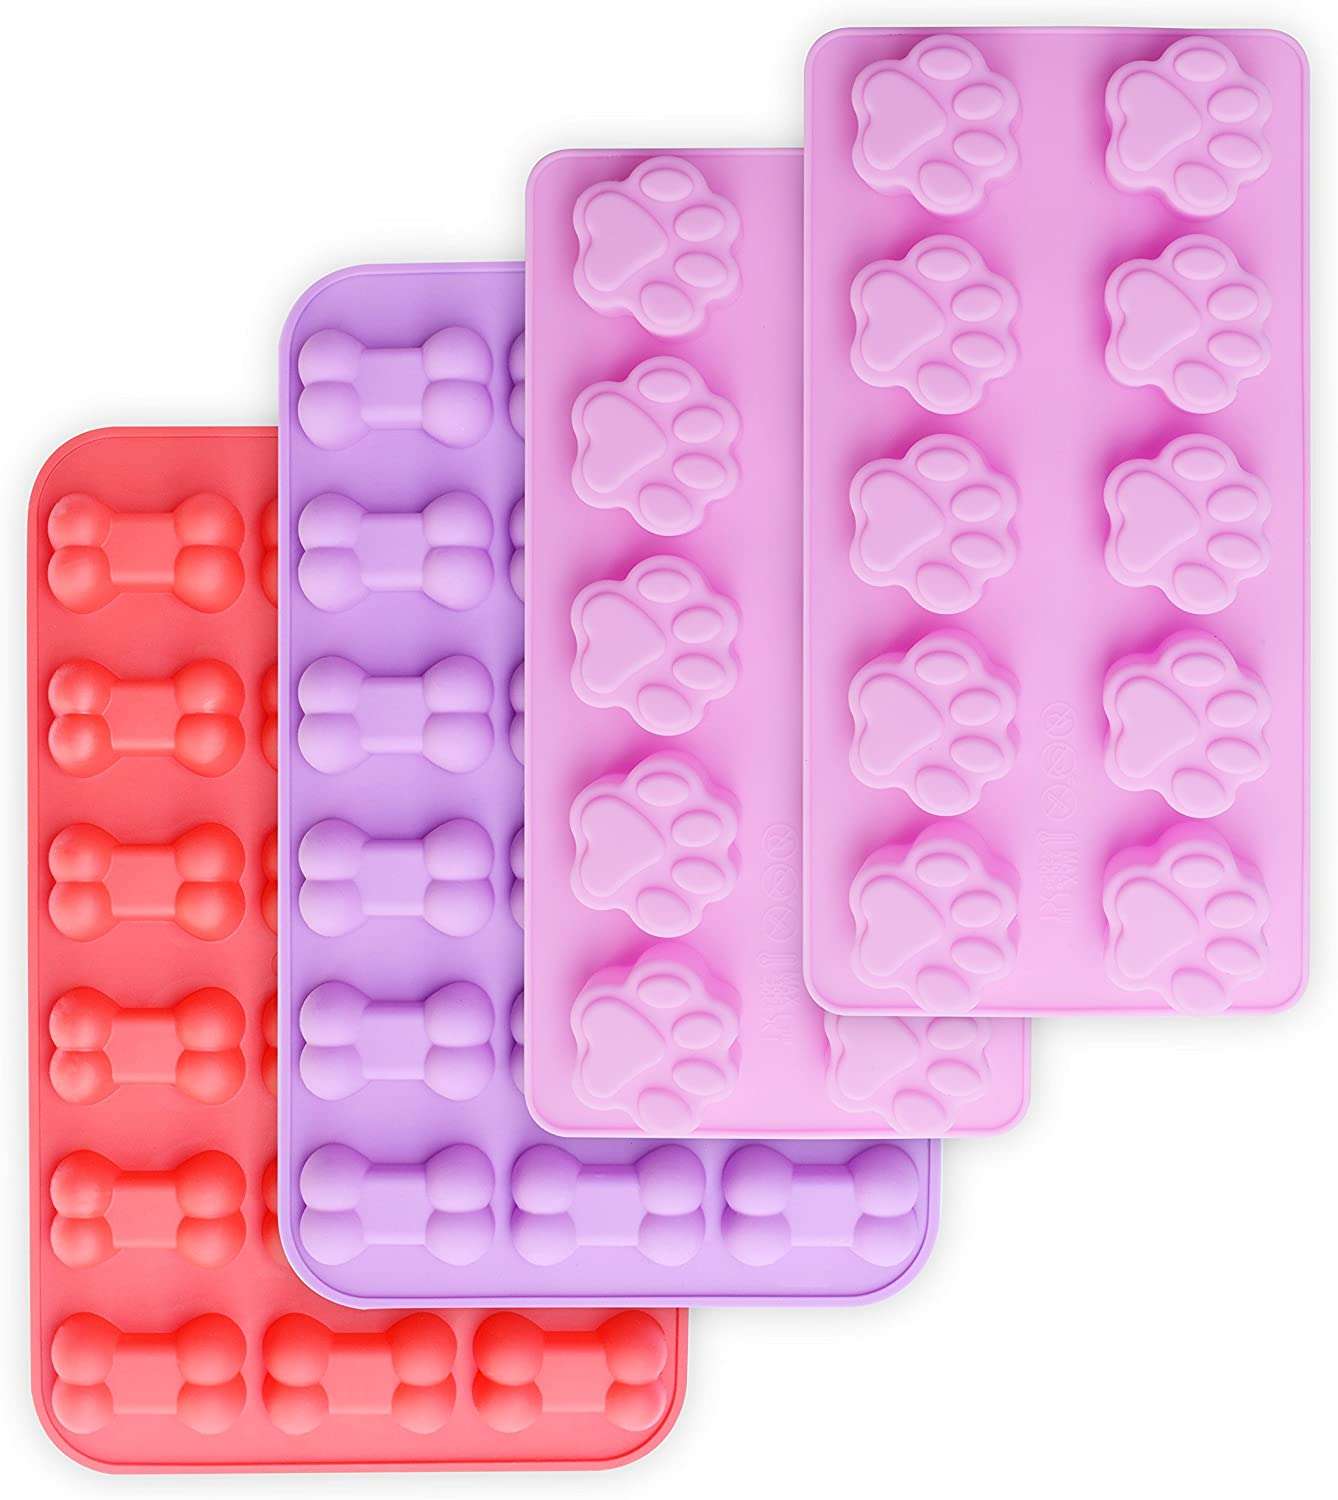 11. HomEdge Candy & Chocolate Mold